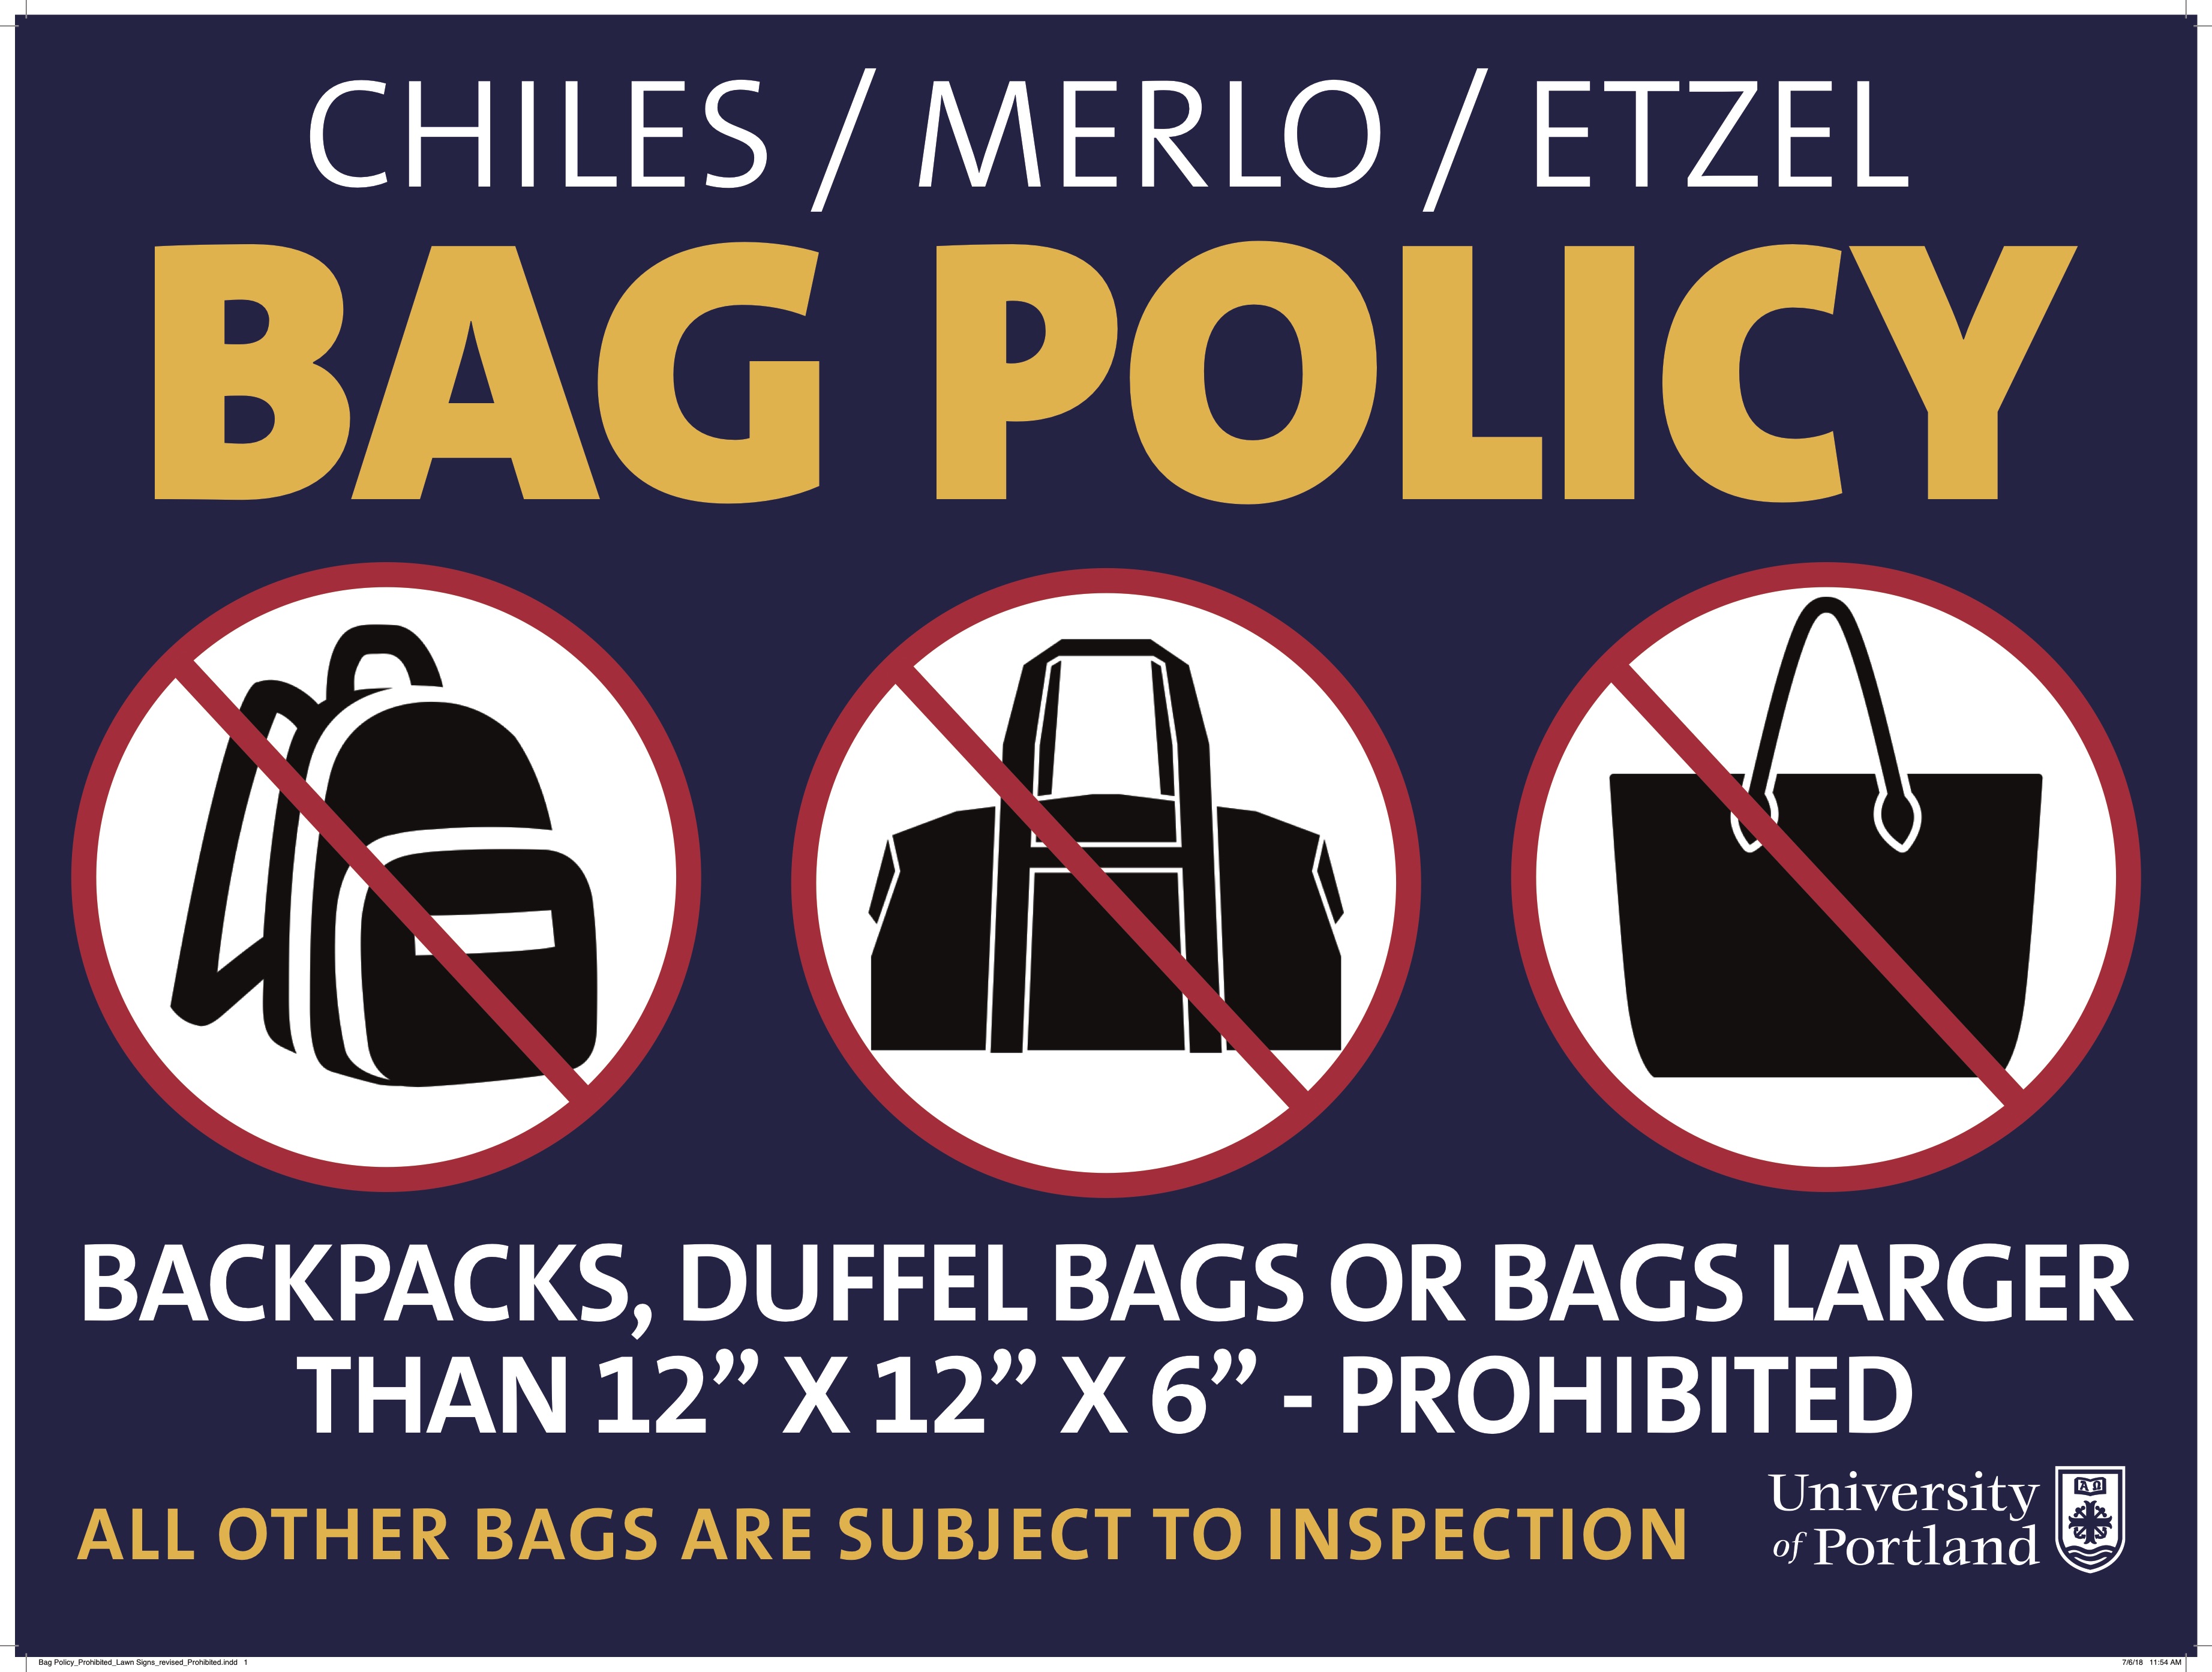 Prohibited Items & Bag Policy